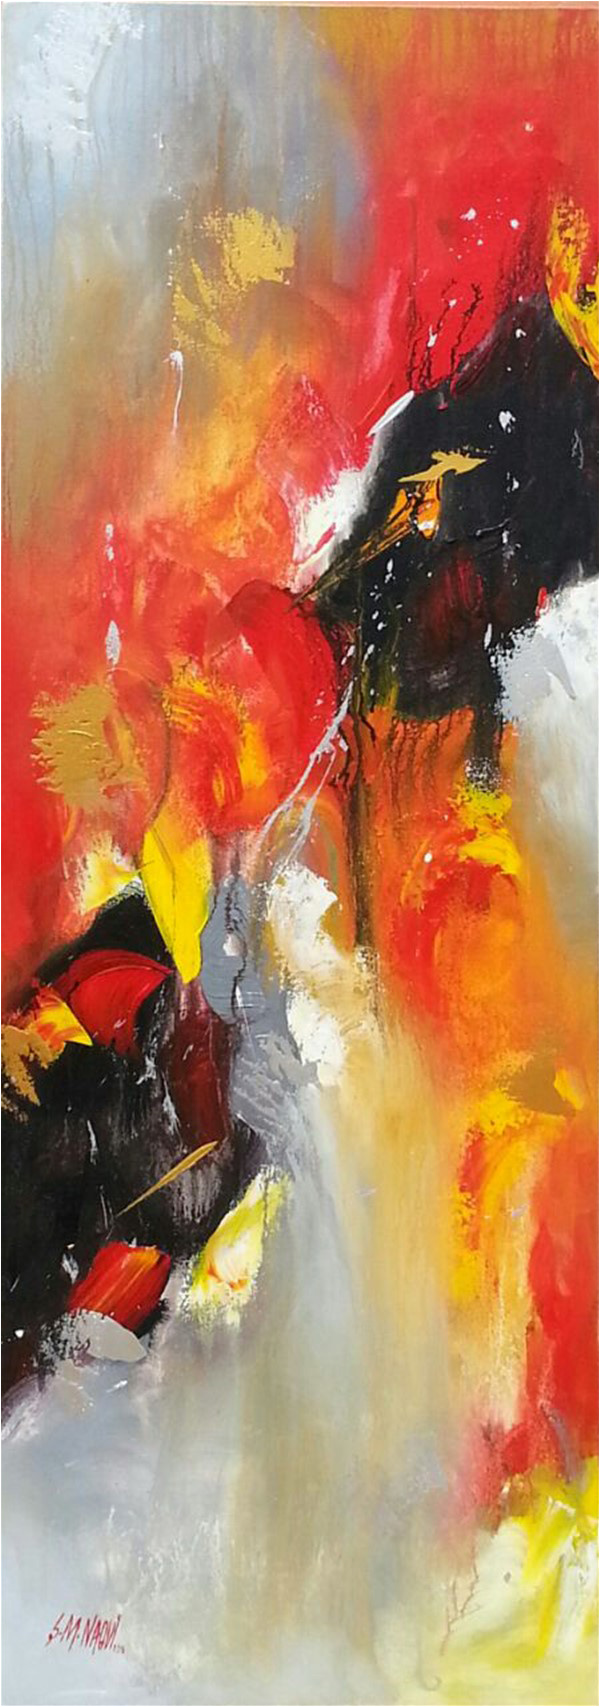 S.M. Naqvi’s ‘Gravity of Colour 2’ - acrylic on canvas, 17x47 inches